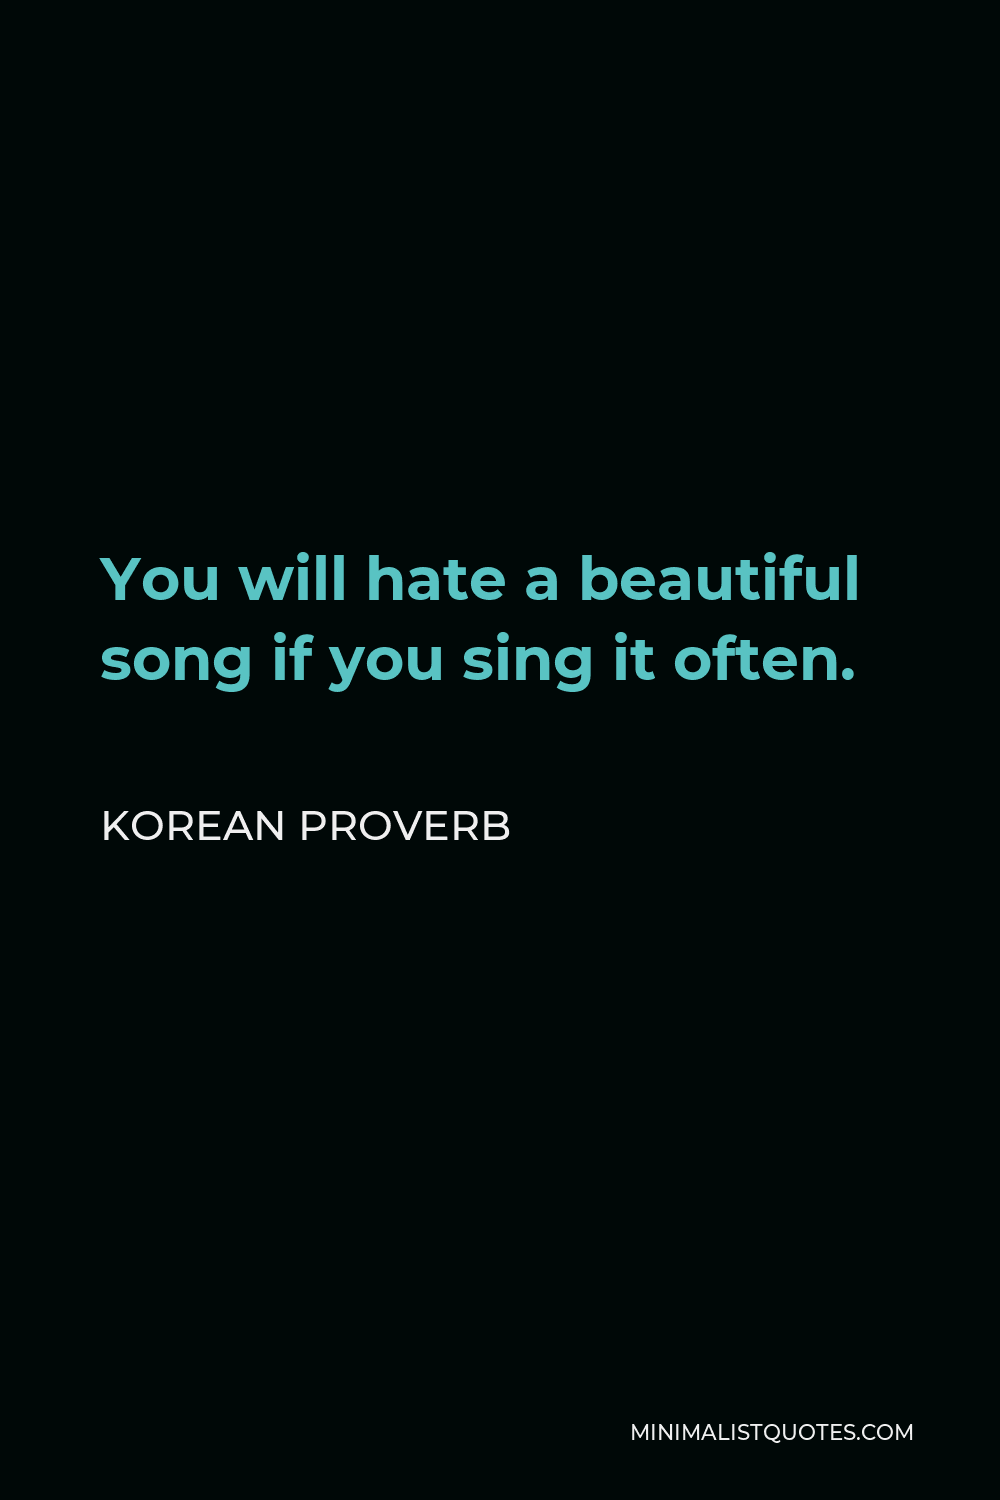 Korean Proverb Quote - You will hate a beautiful song if you sing it often.